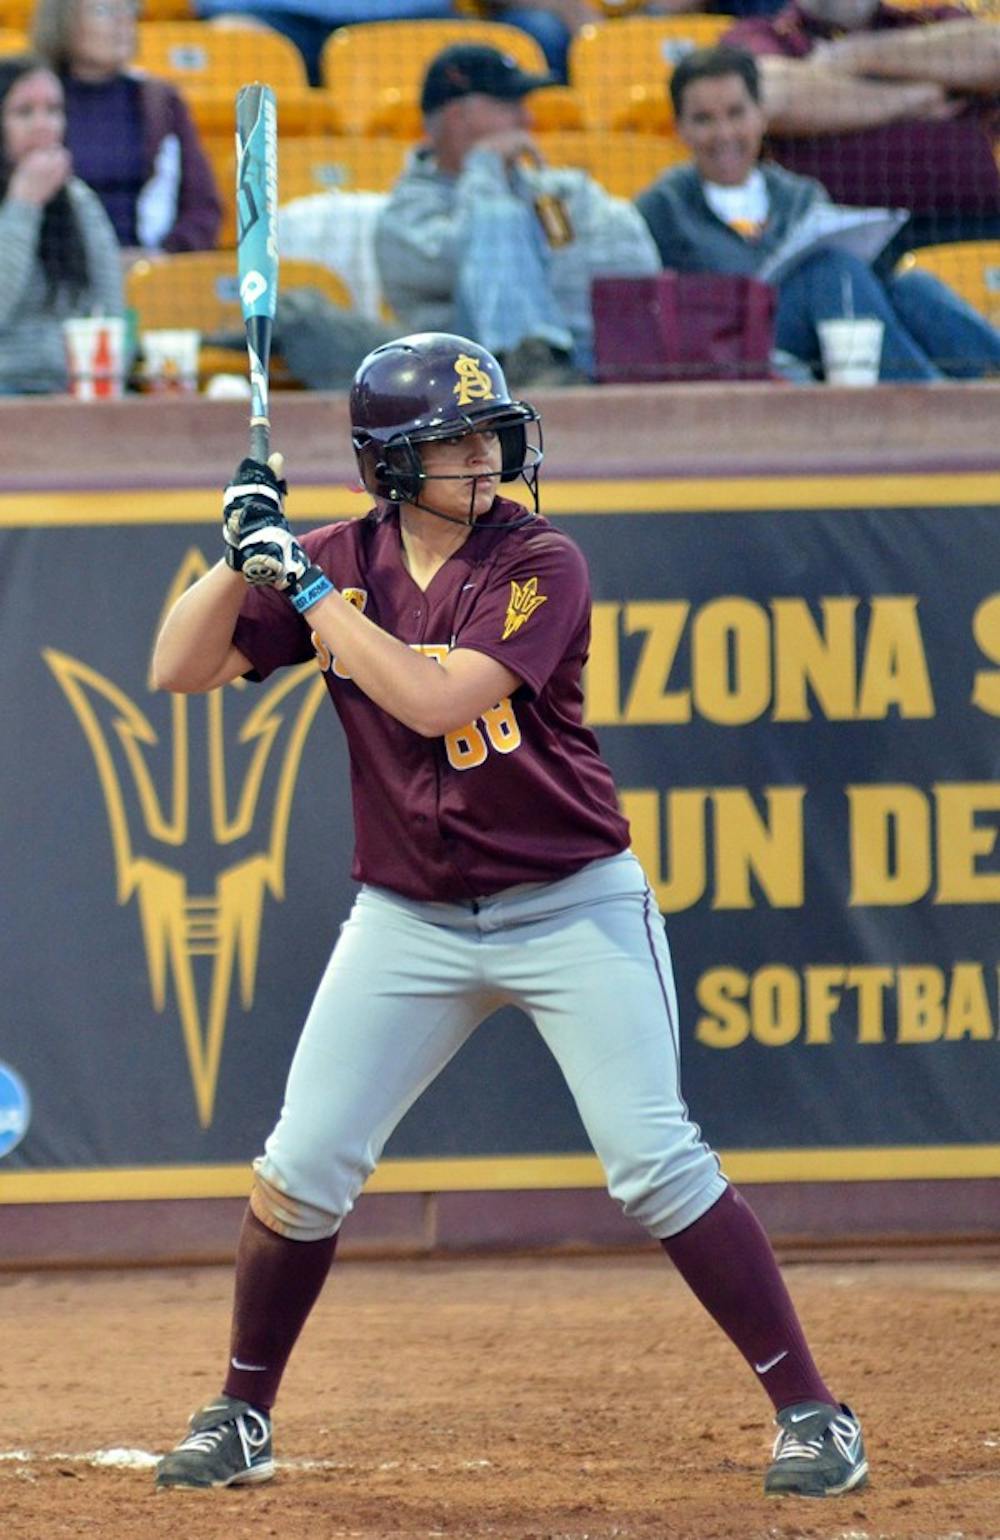 Annie Lockwood stands in the batter’s box in the Kajikawa Classic on Feb. 10. Lockwood and the Sun Devils face UCLA, the nation’s top team in team batting average, this weekend at home. (Photo by Aaron Lavinsky)